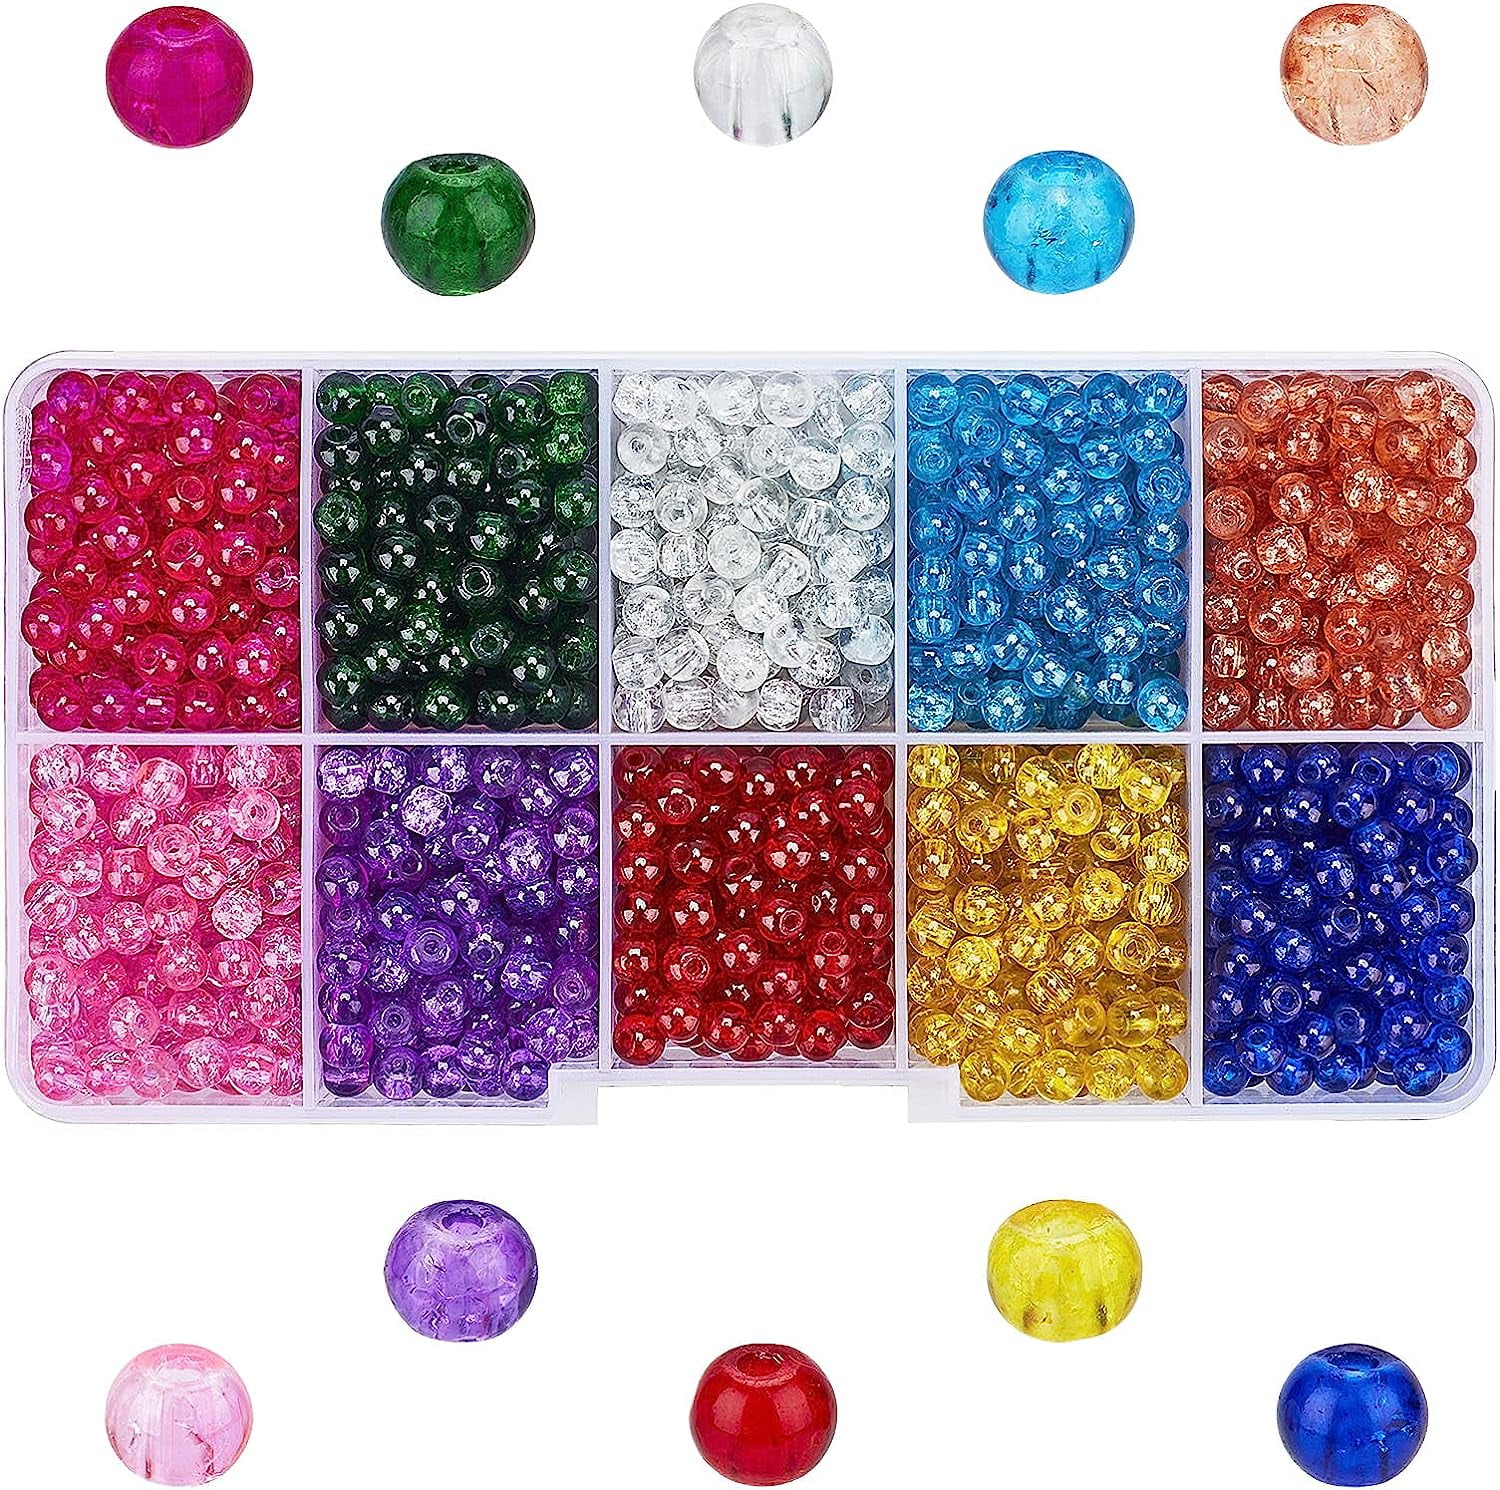 100pcs 10 Color Crackle Glass Beads 10mm Handcrafted Lampwork Round Crystal  Beads Bulk For Summer Beading Friendship Bracelet Mother's Day Jewelry Mak